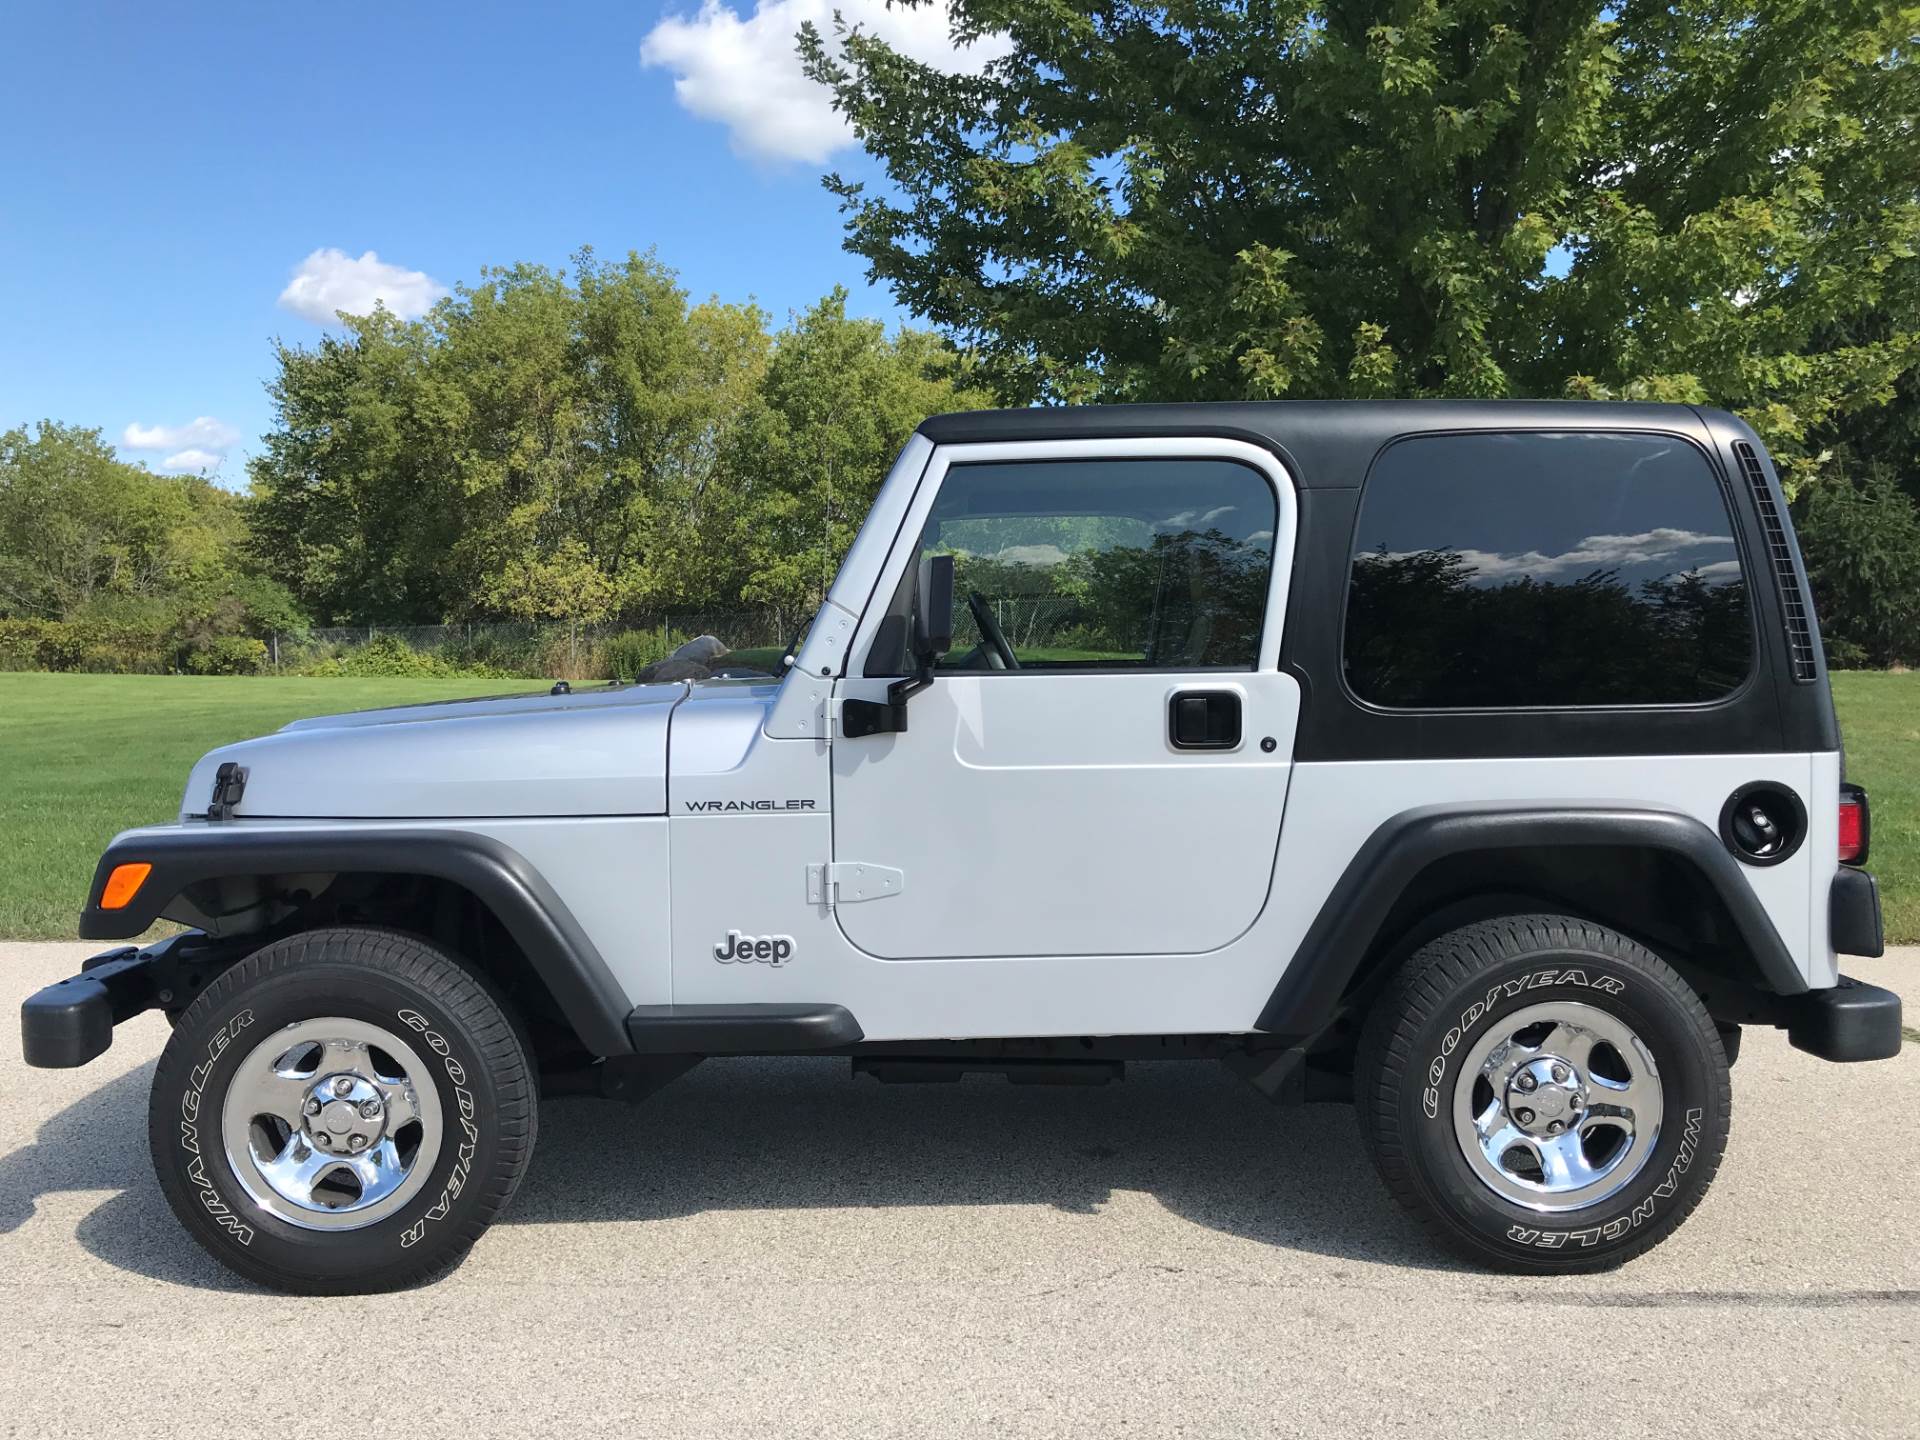 2002 Jeep Wrangler X Apex Edition 4WD 2dr SUV in Big Bend, Wisconsin - Photo 1